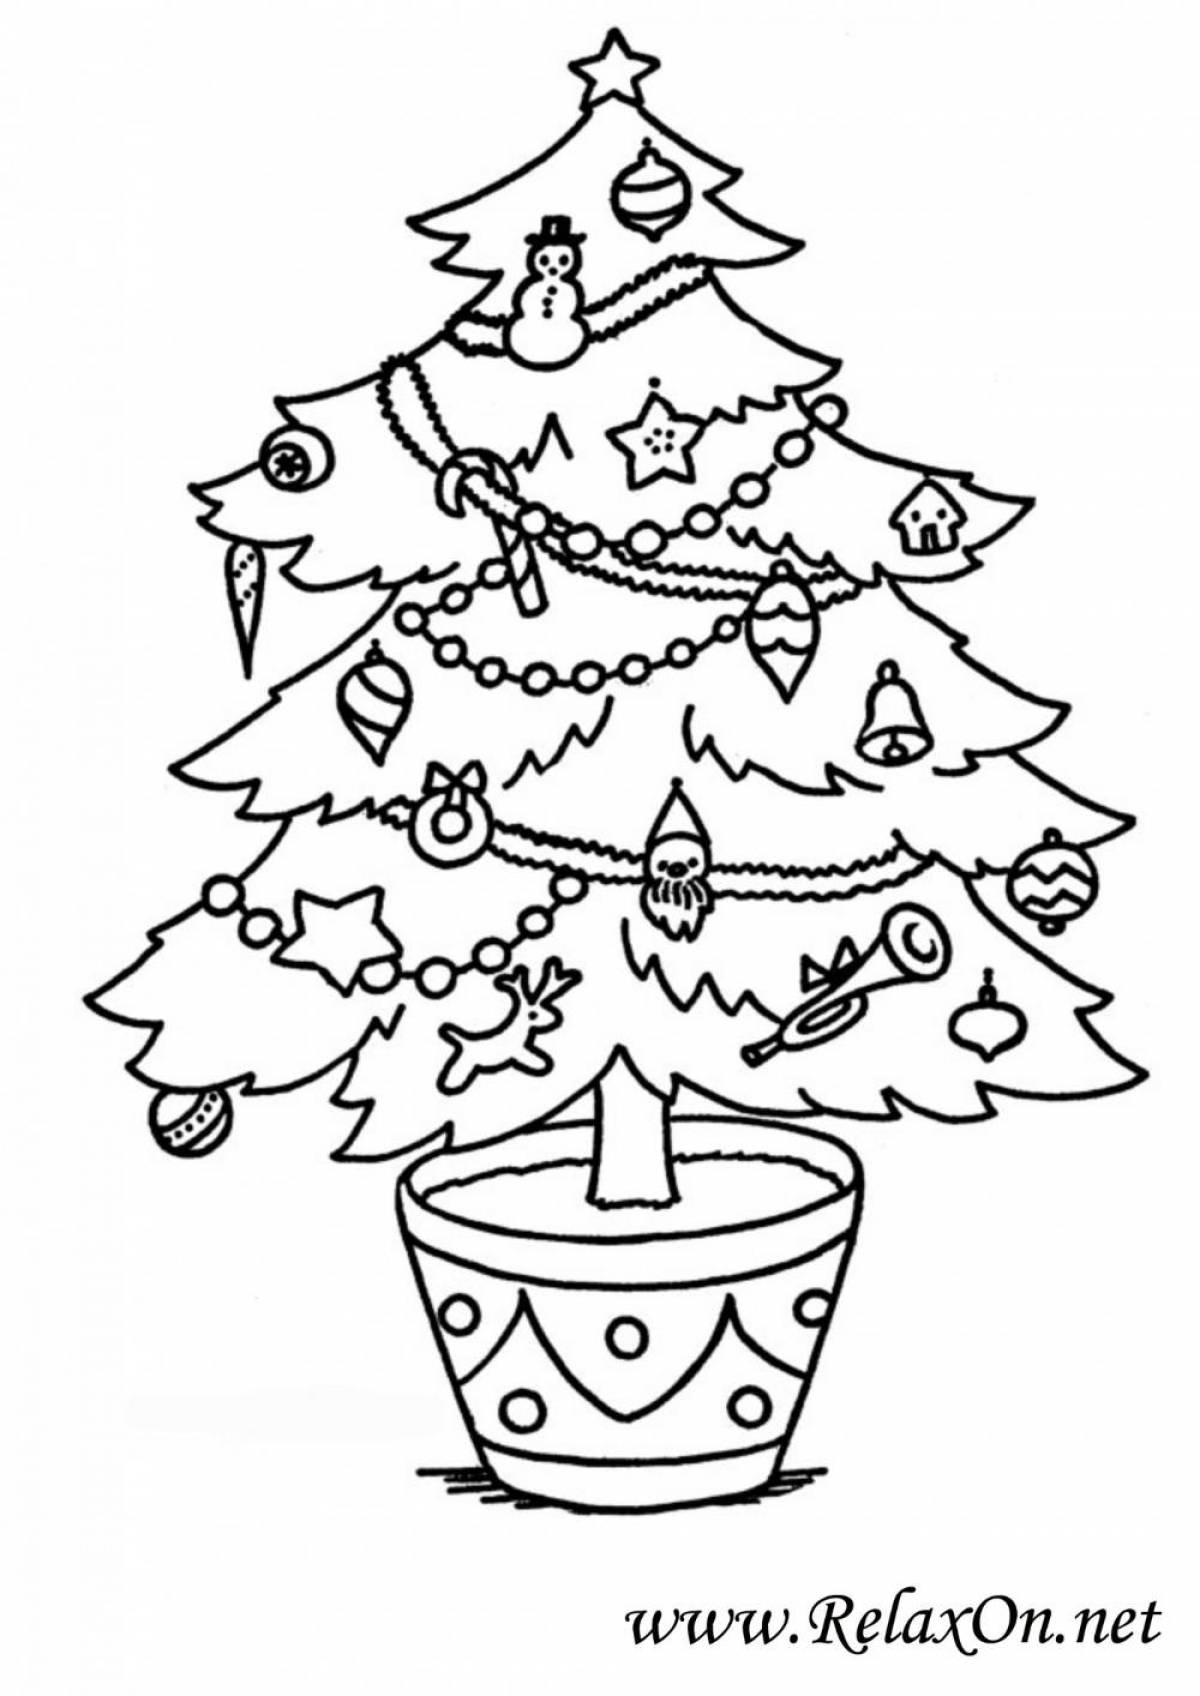 Creative coloring tree for 3-4 year olds